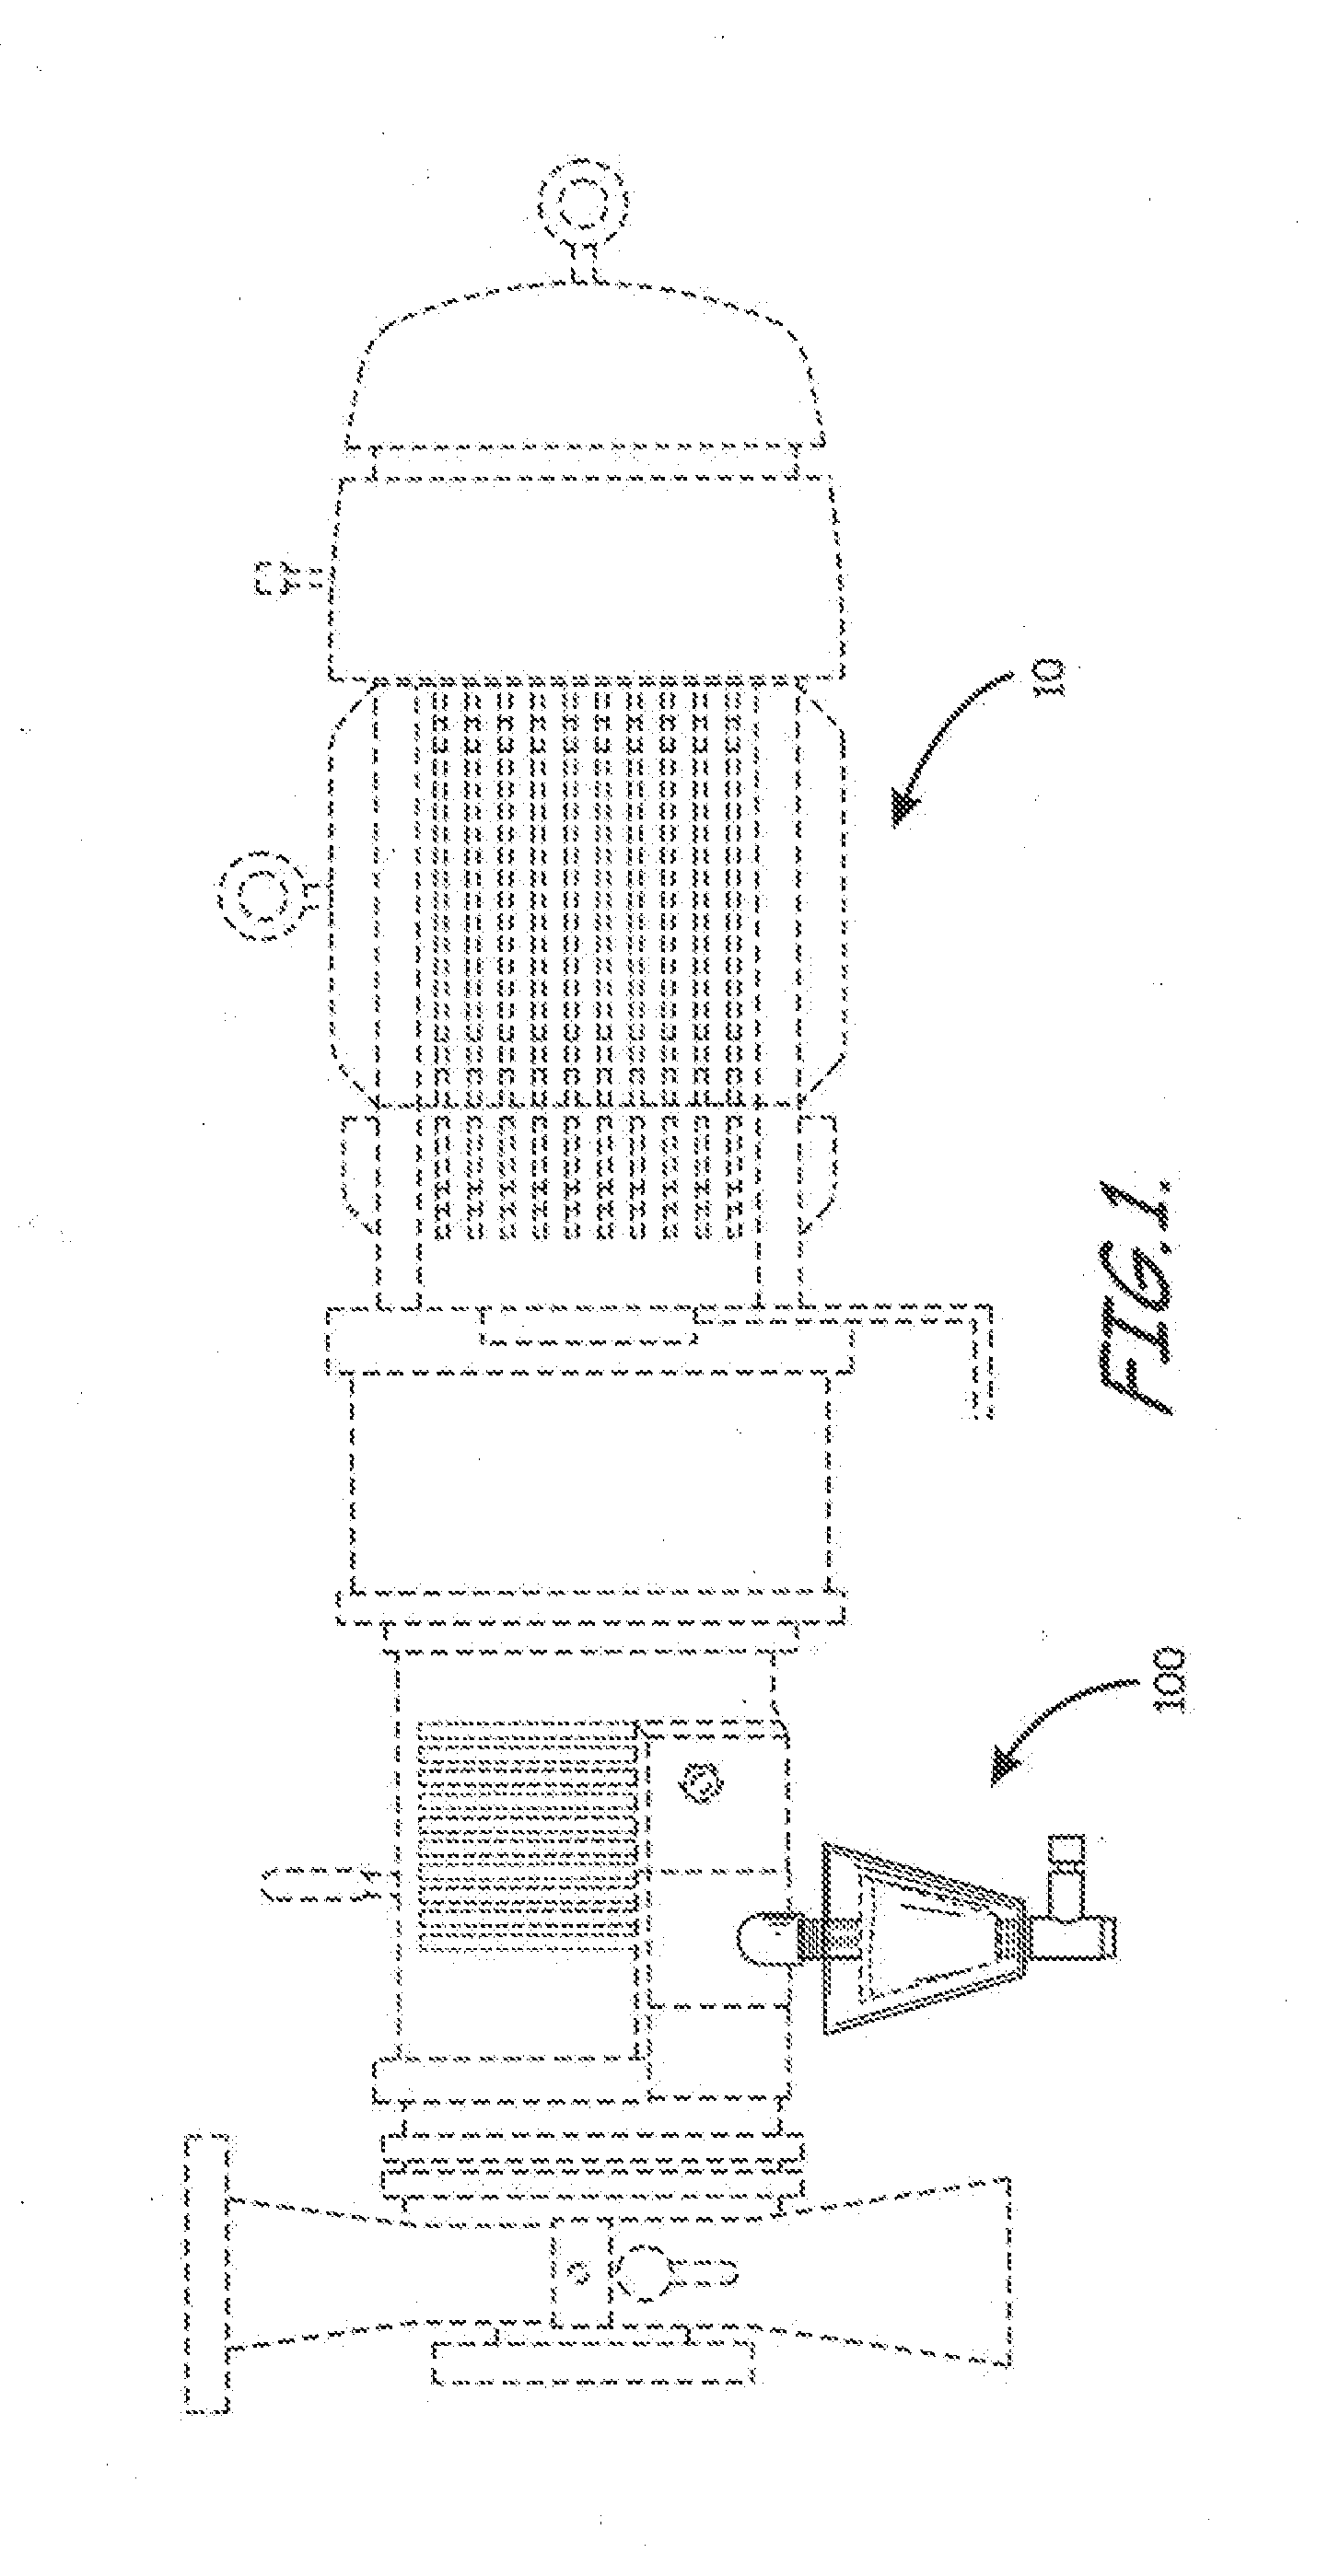 Drainable sight glass and associated methods